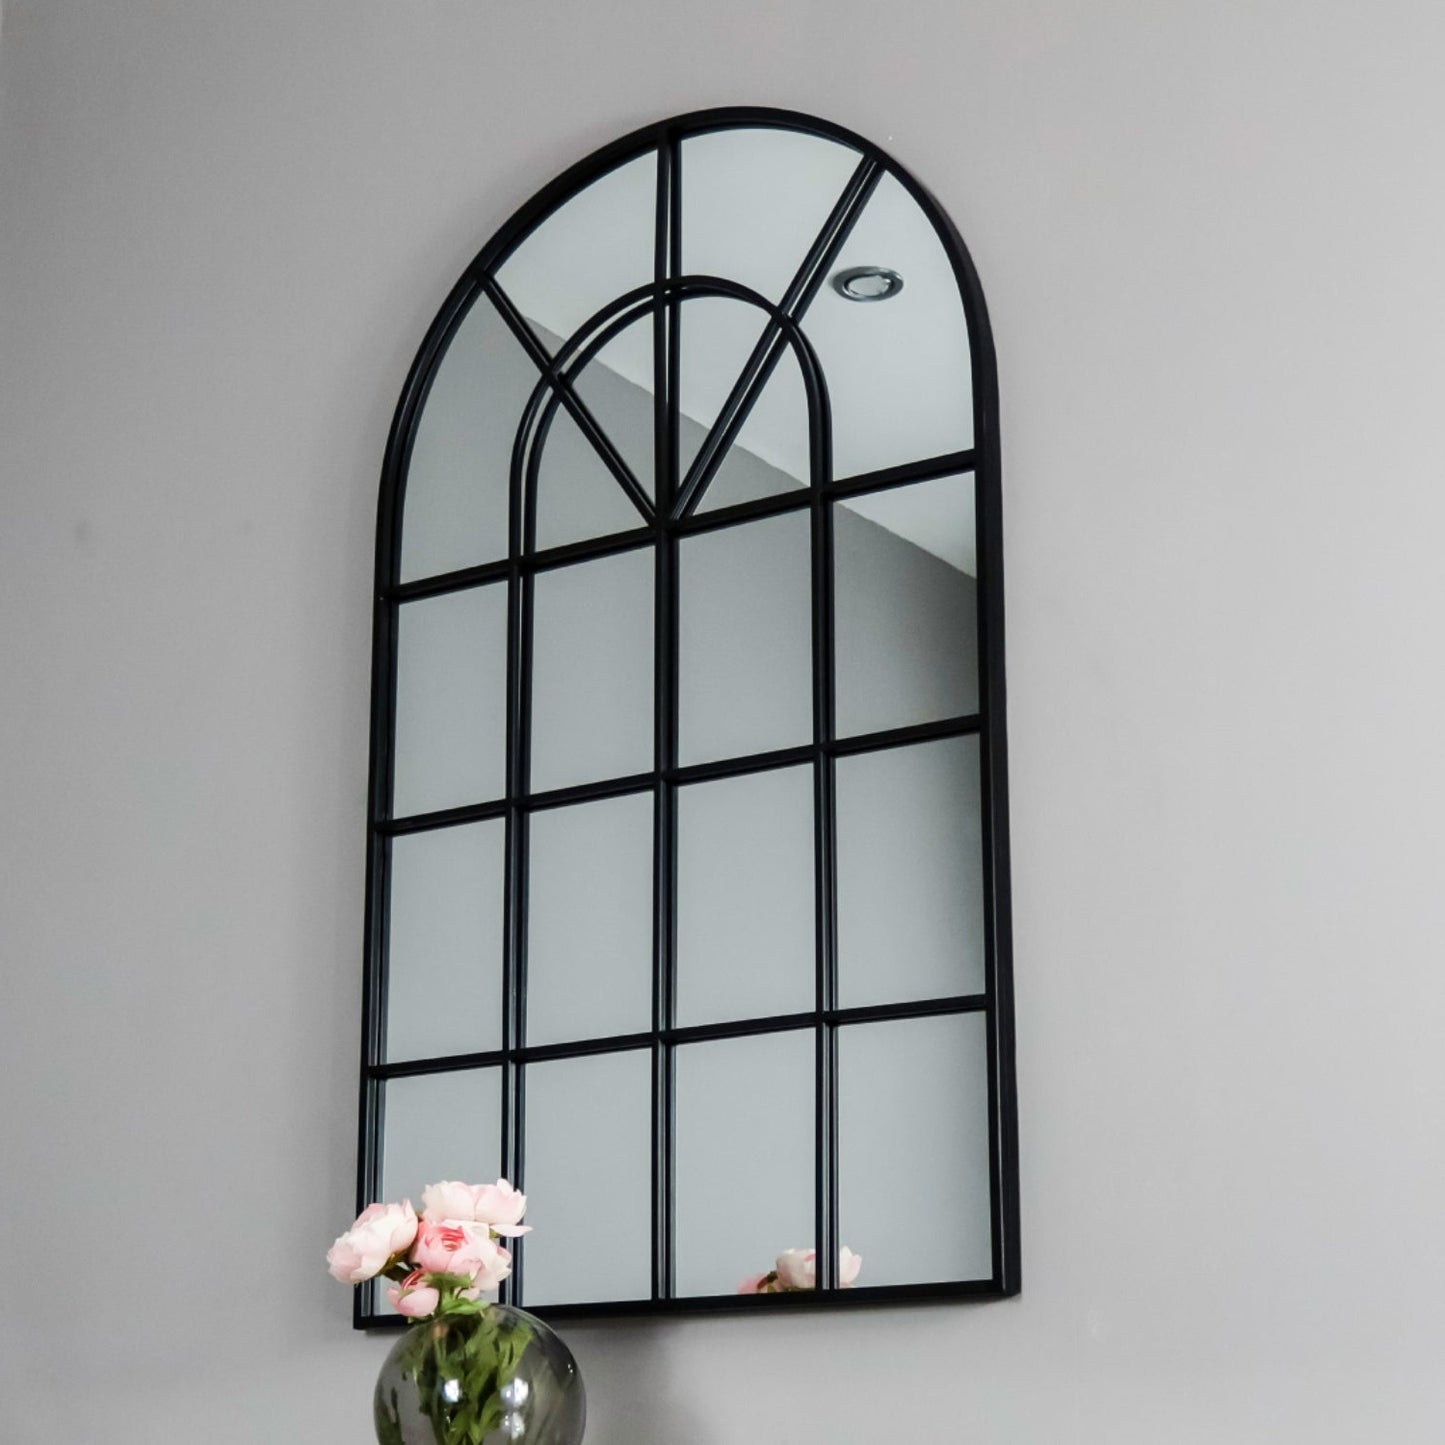 Arched rome mirror by Native